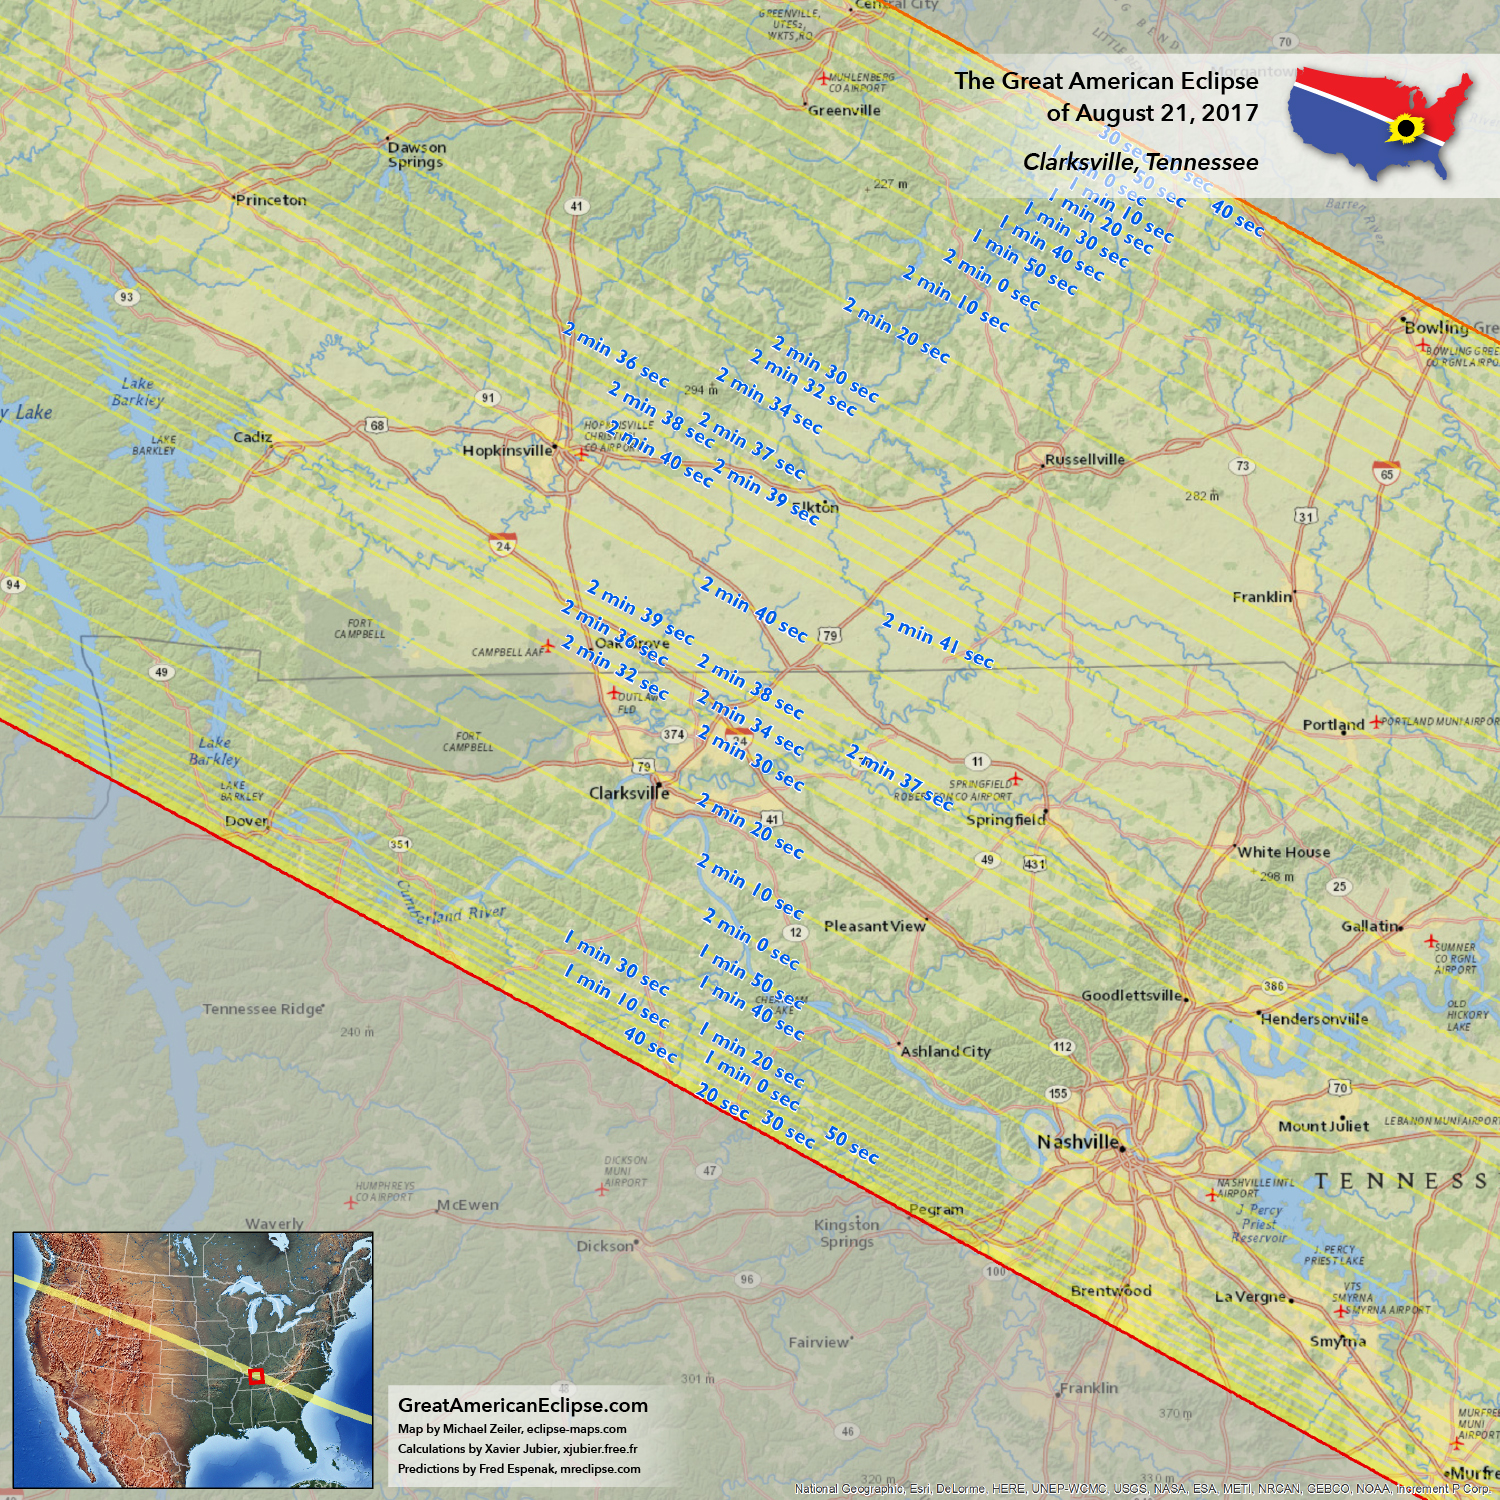 Tennessee Eclipse Total Solar Eclipse Of April 8 2024